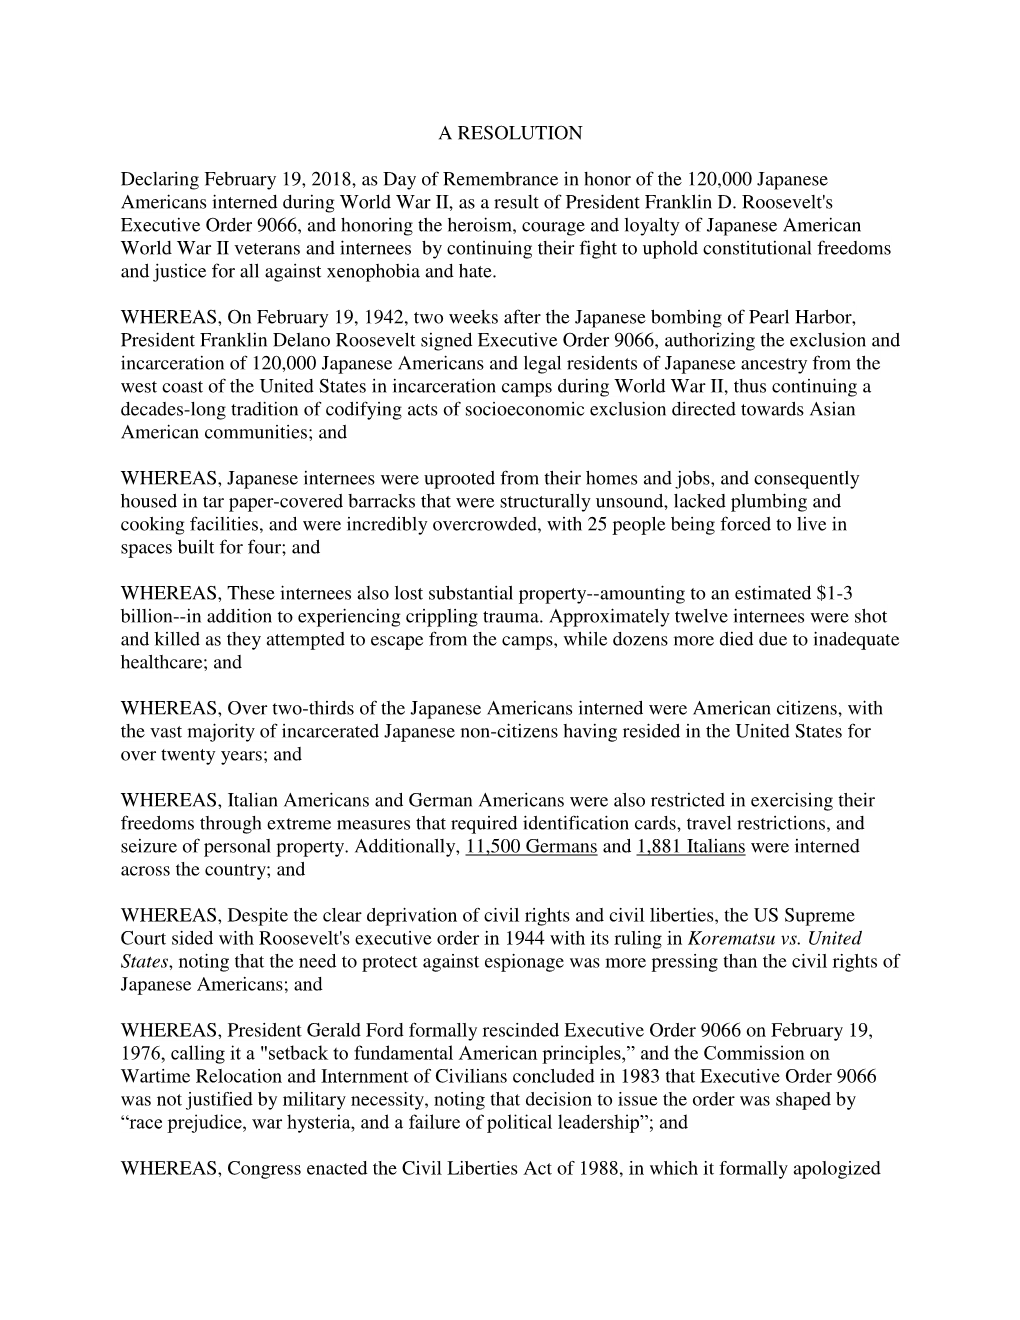 A RESOLUTION Declaring February 19, 2018, As Day of Remembrance